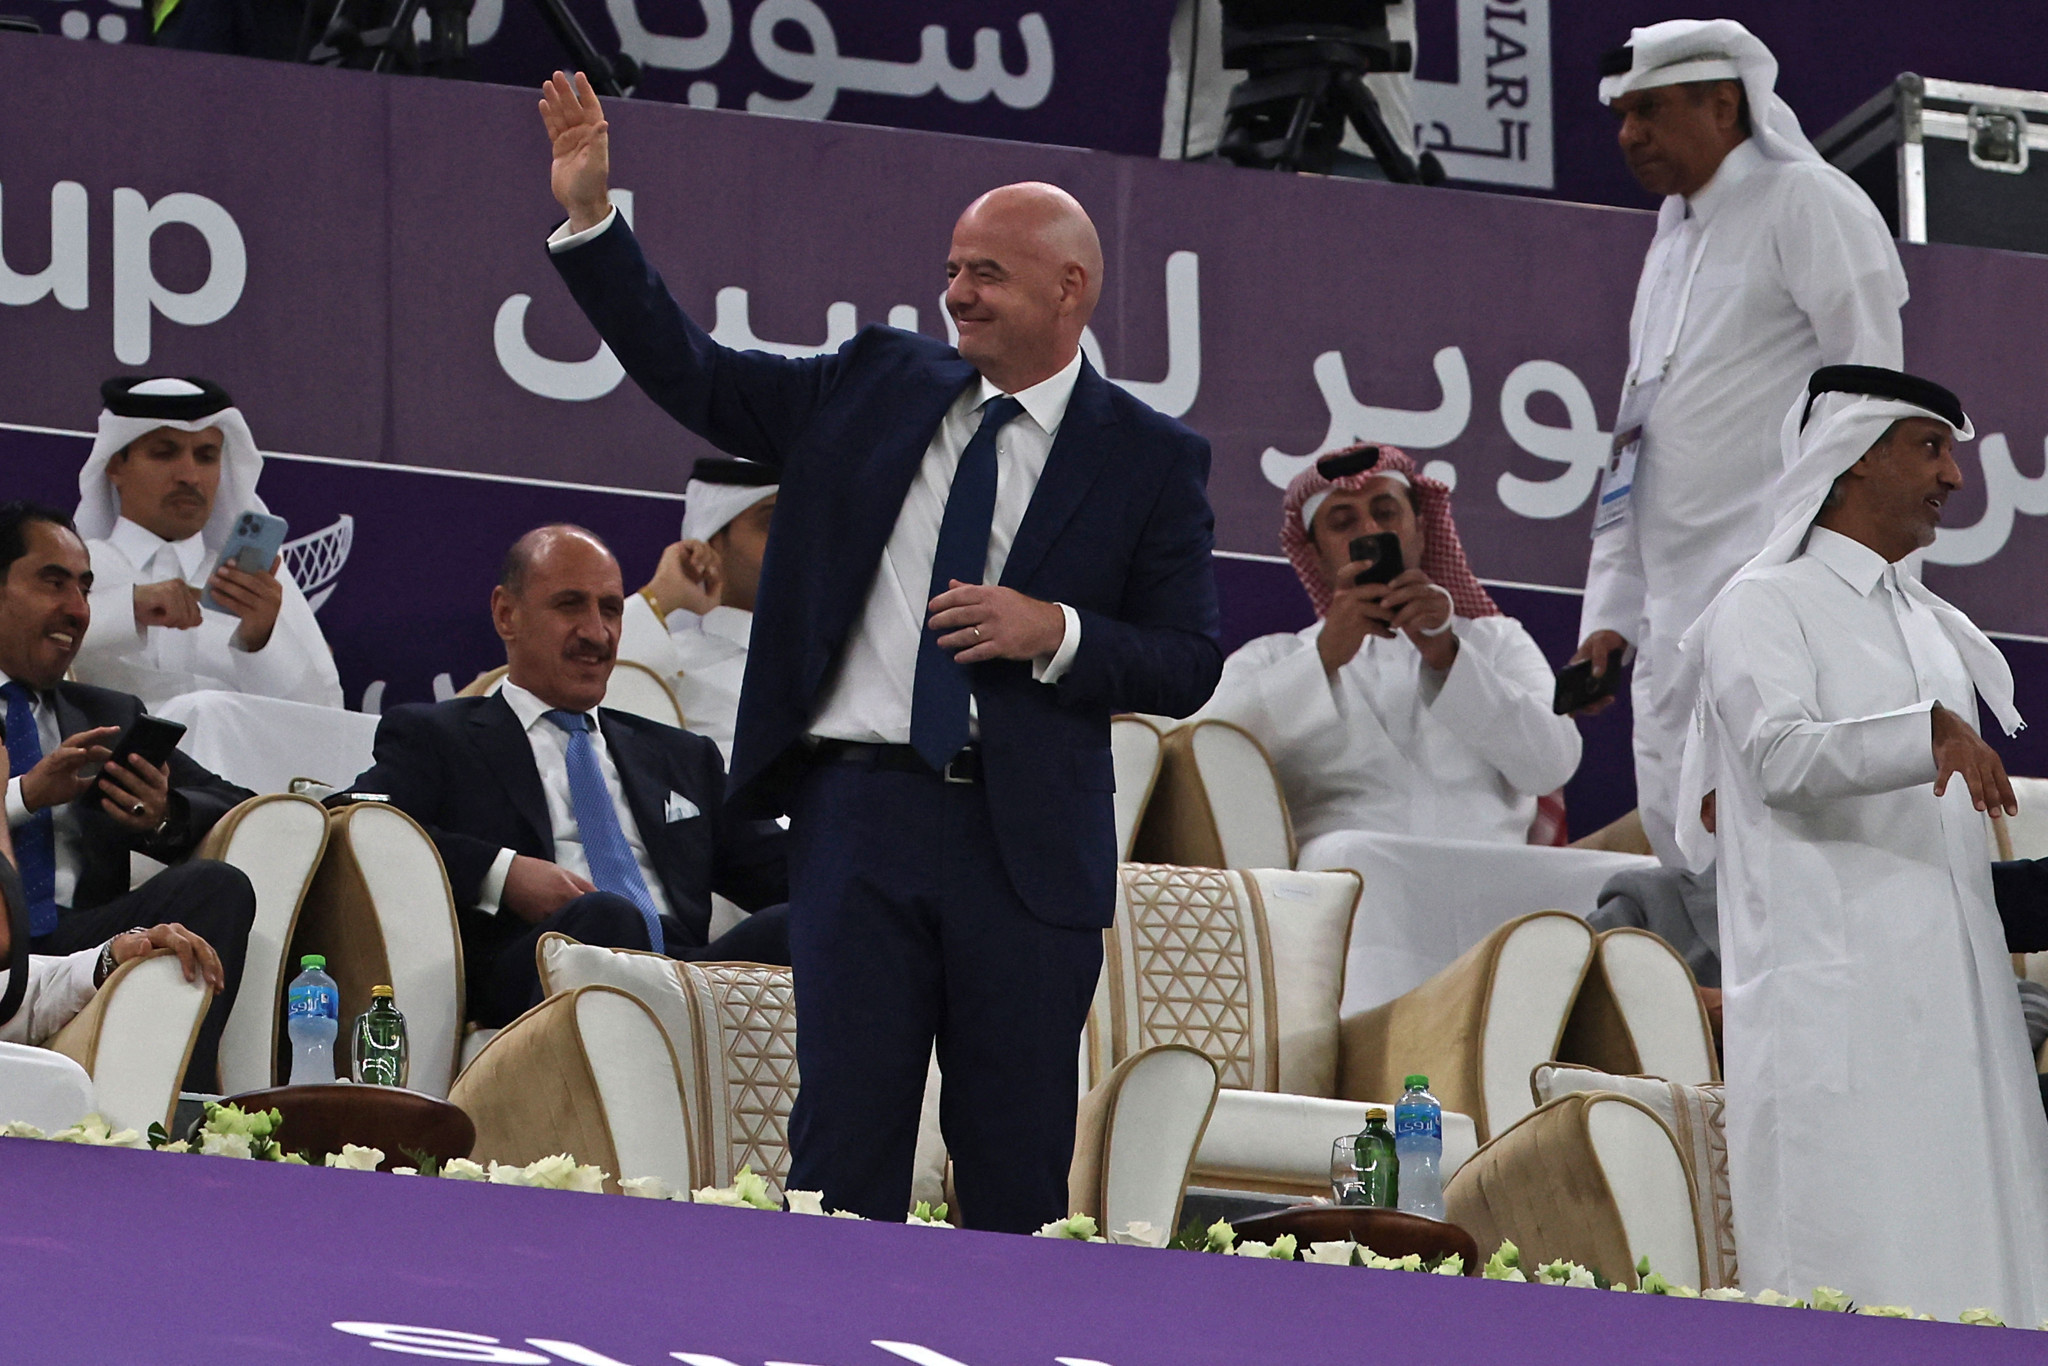 FIFA President Gianni Infantino attended a World Cup test event in Qatar ©Getty Images